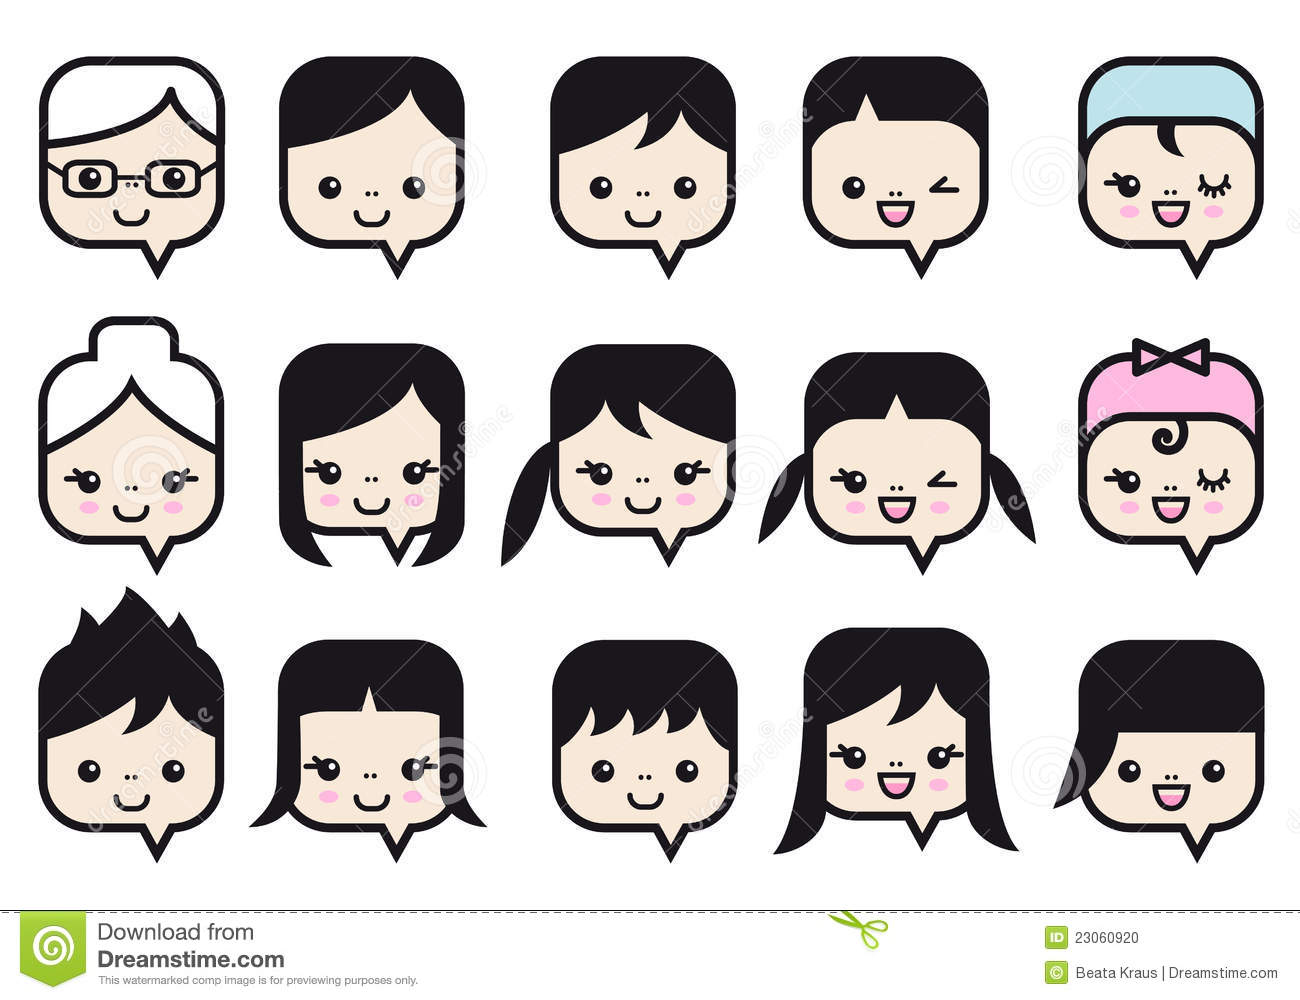 Vector People Icons